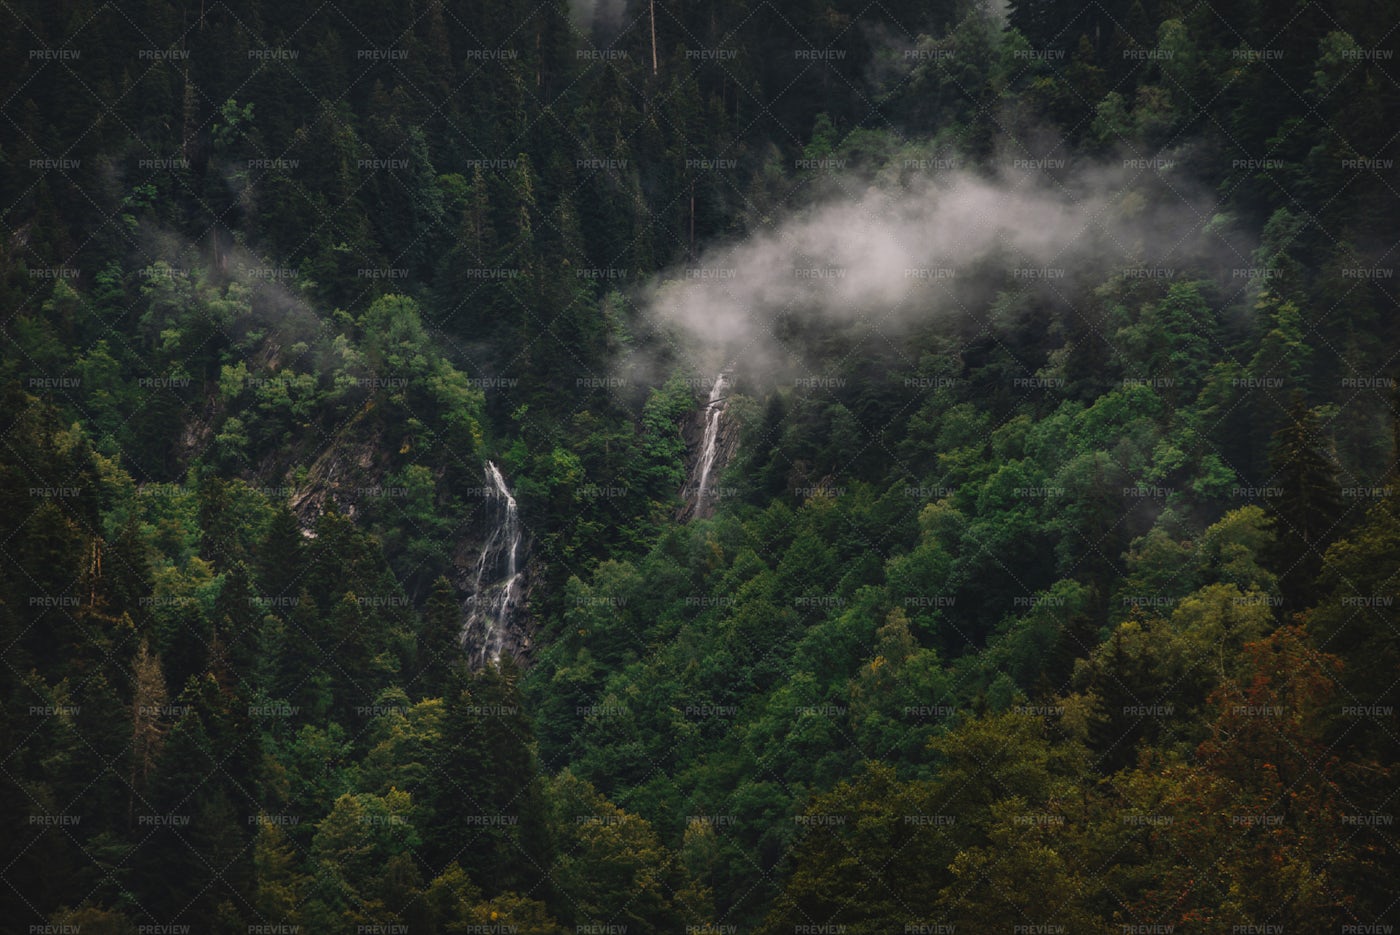 Waterfalls In The Mountain Forest: Stock Photos